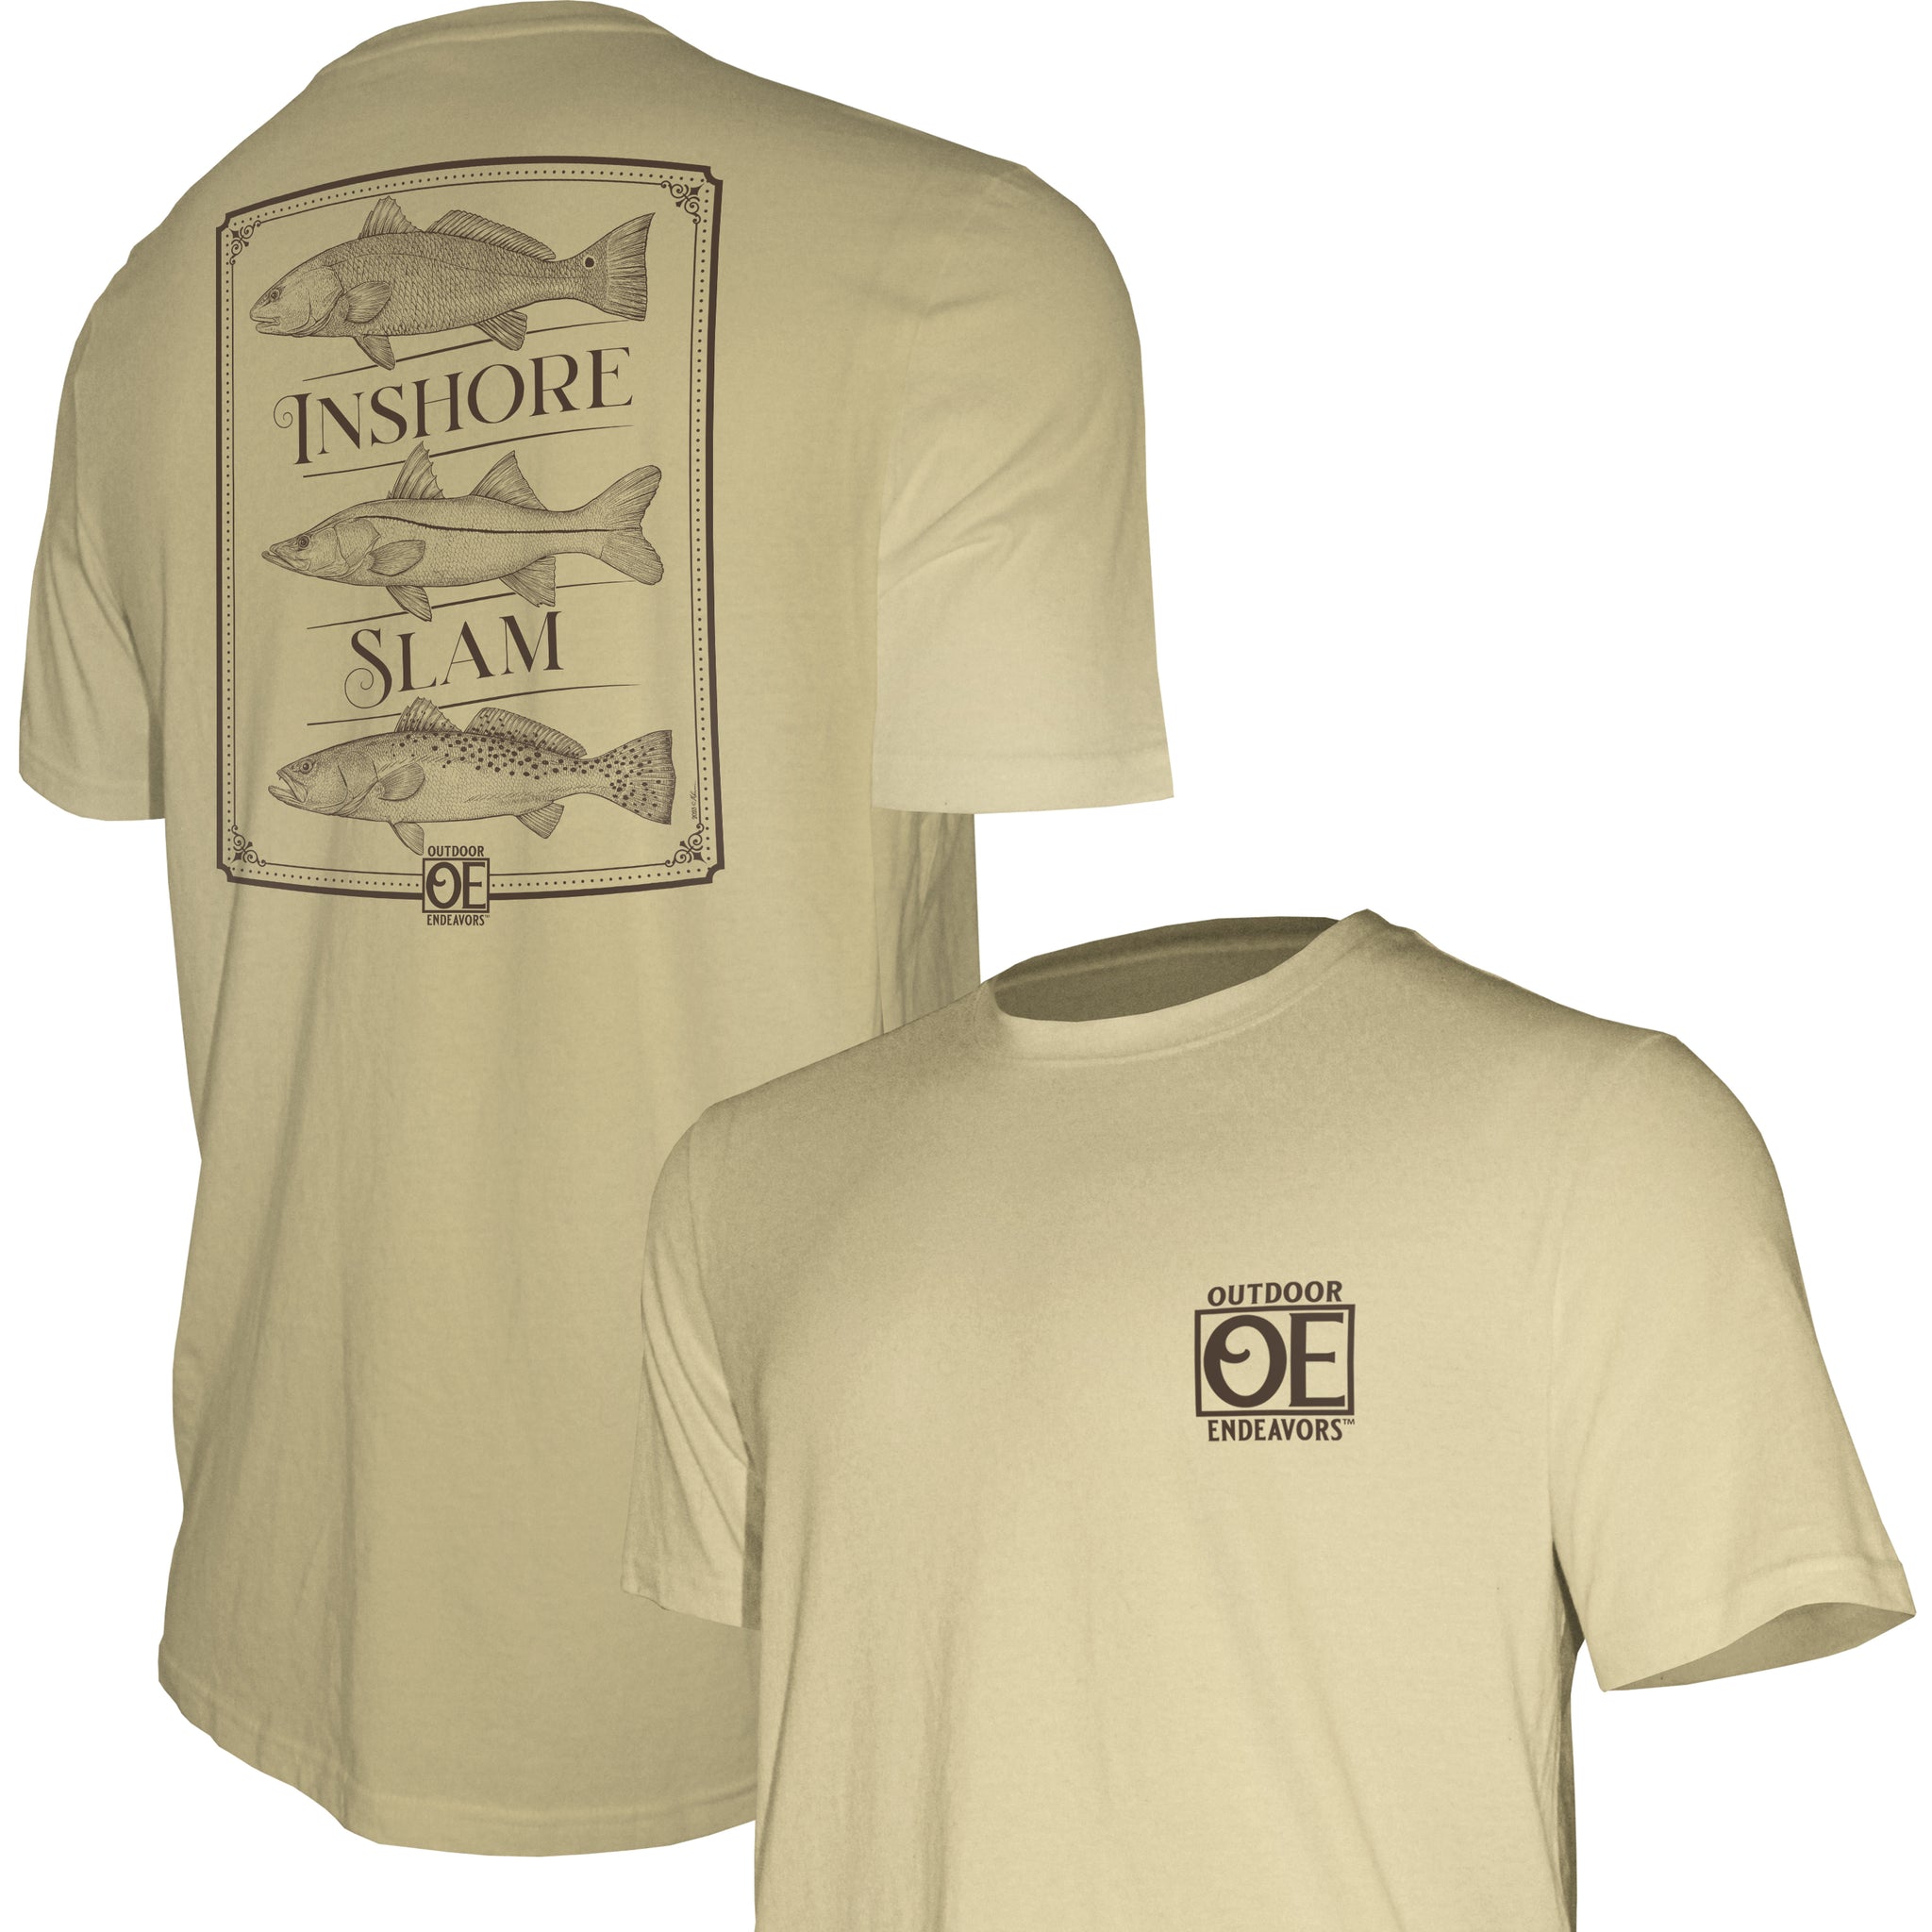 Outdoor Endeavors Classic- American Made Tee - Inshore Slam